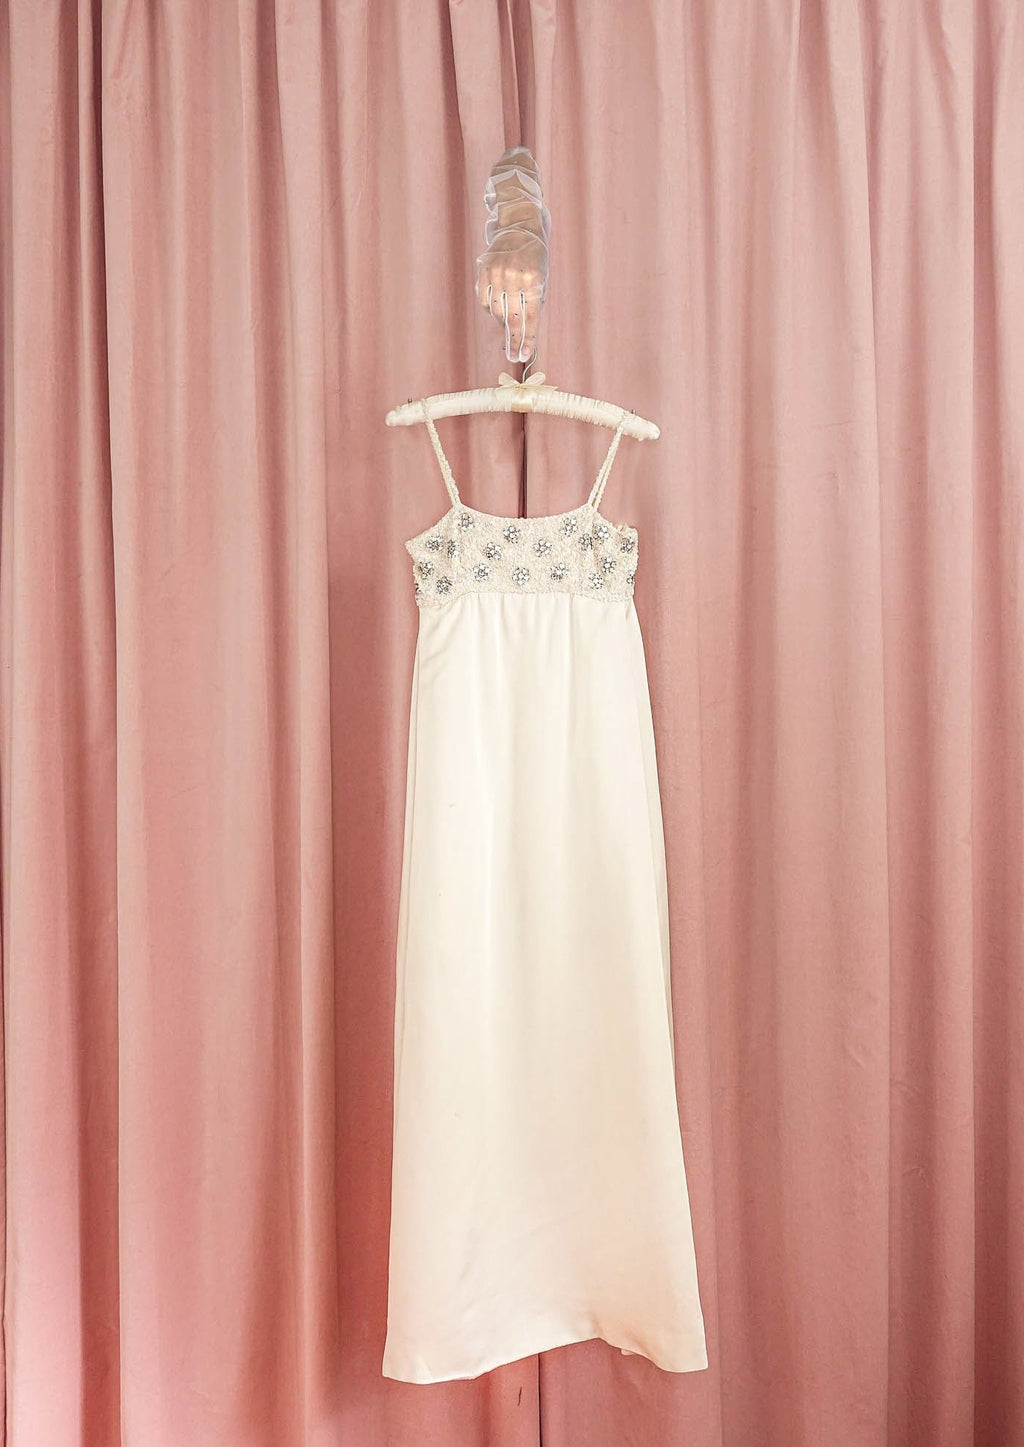 1960s 'Alfred Bosand' White Satin Empire Gown